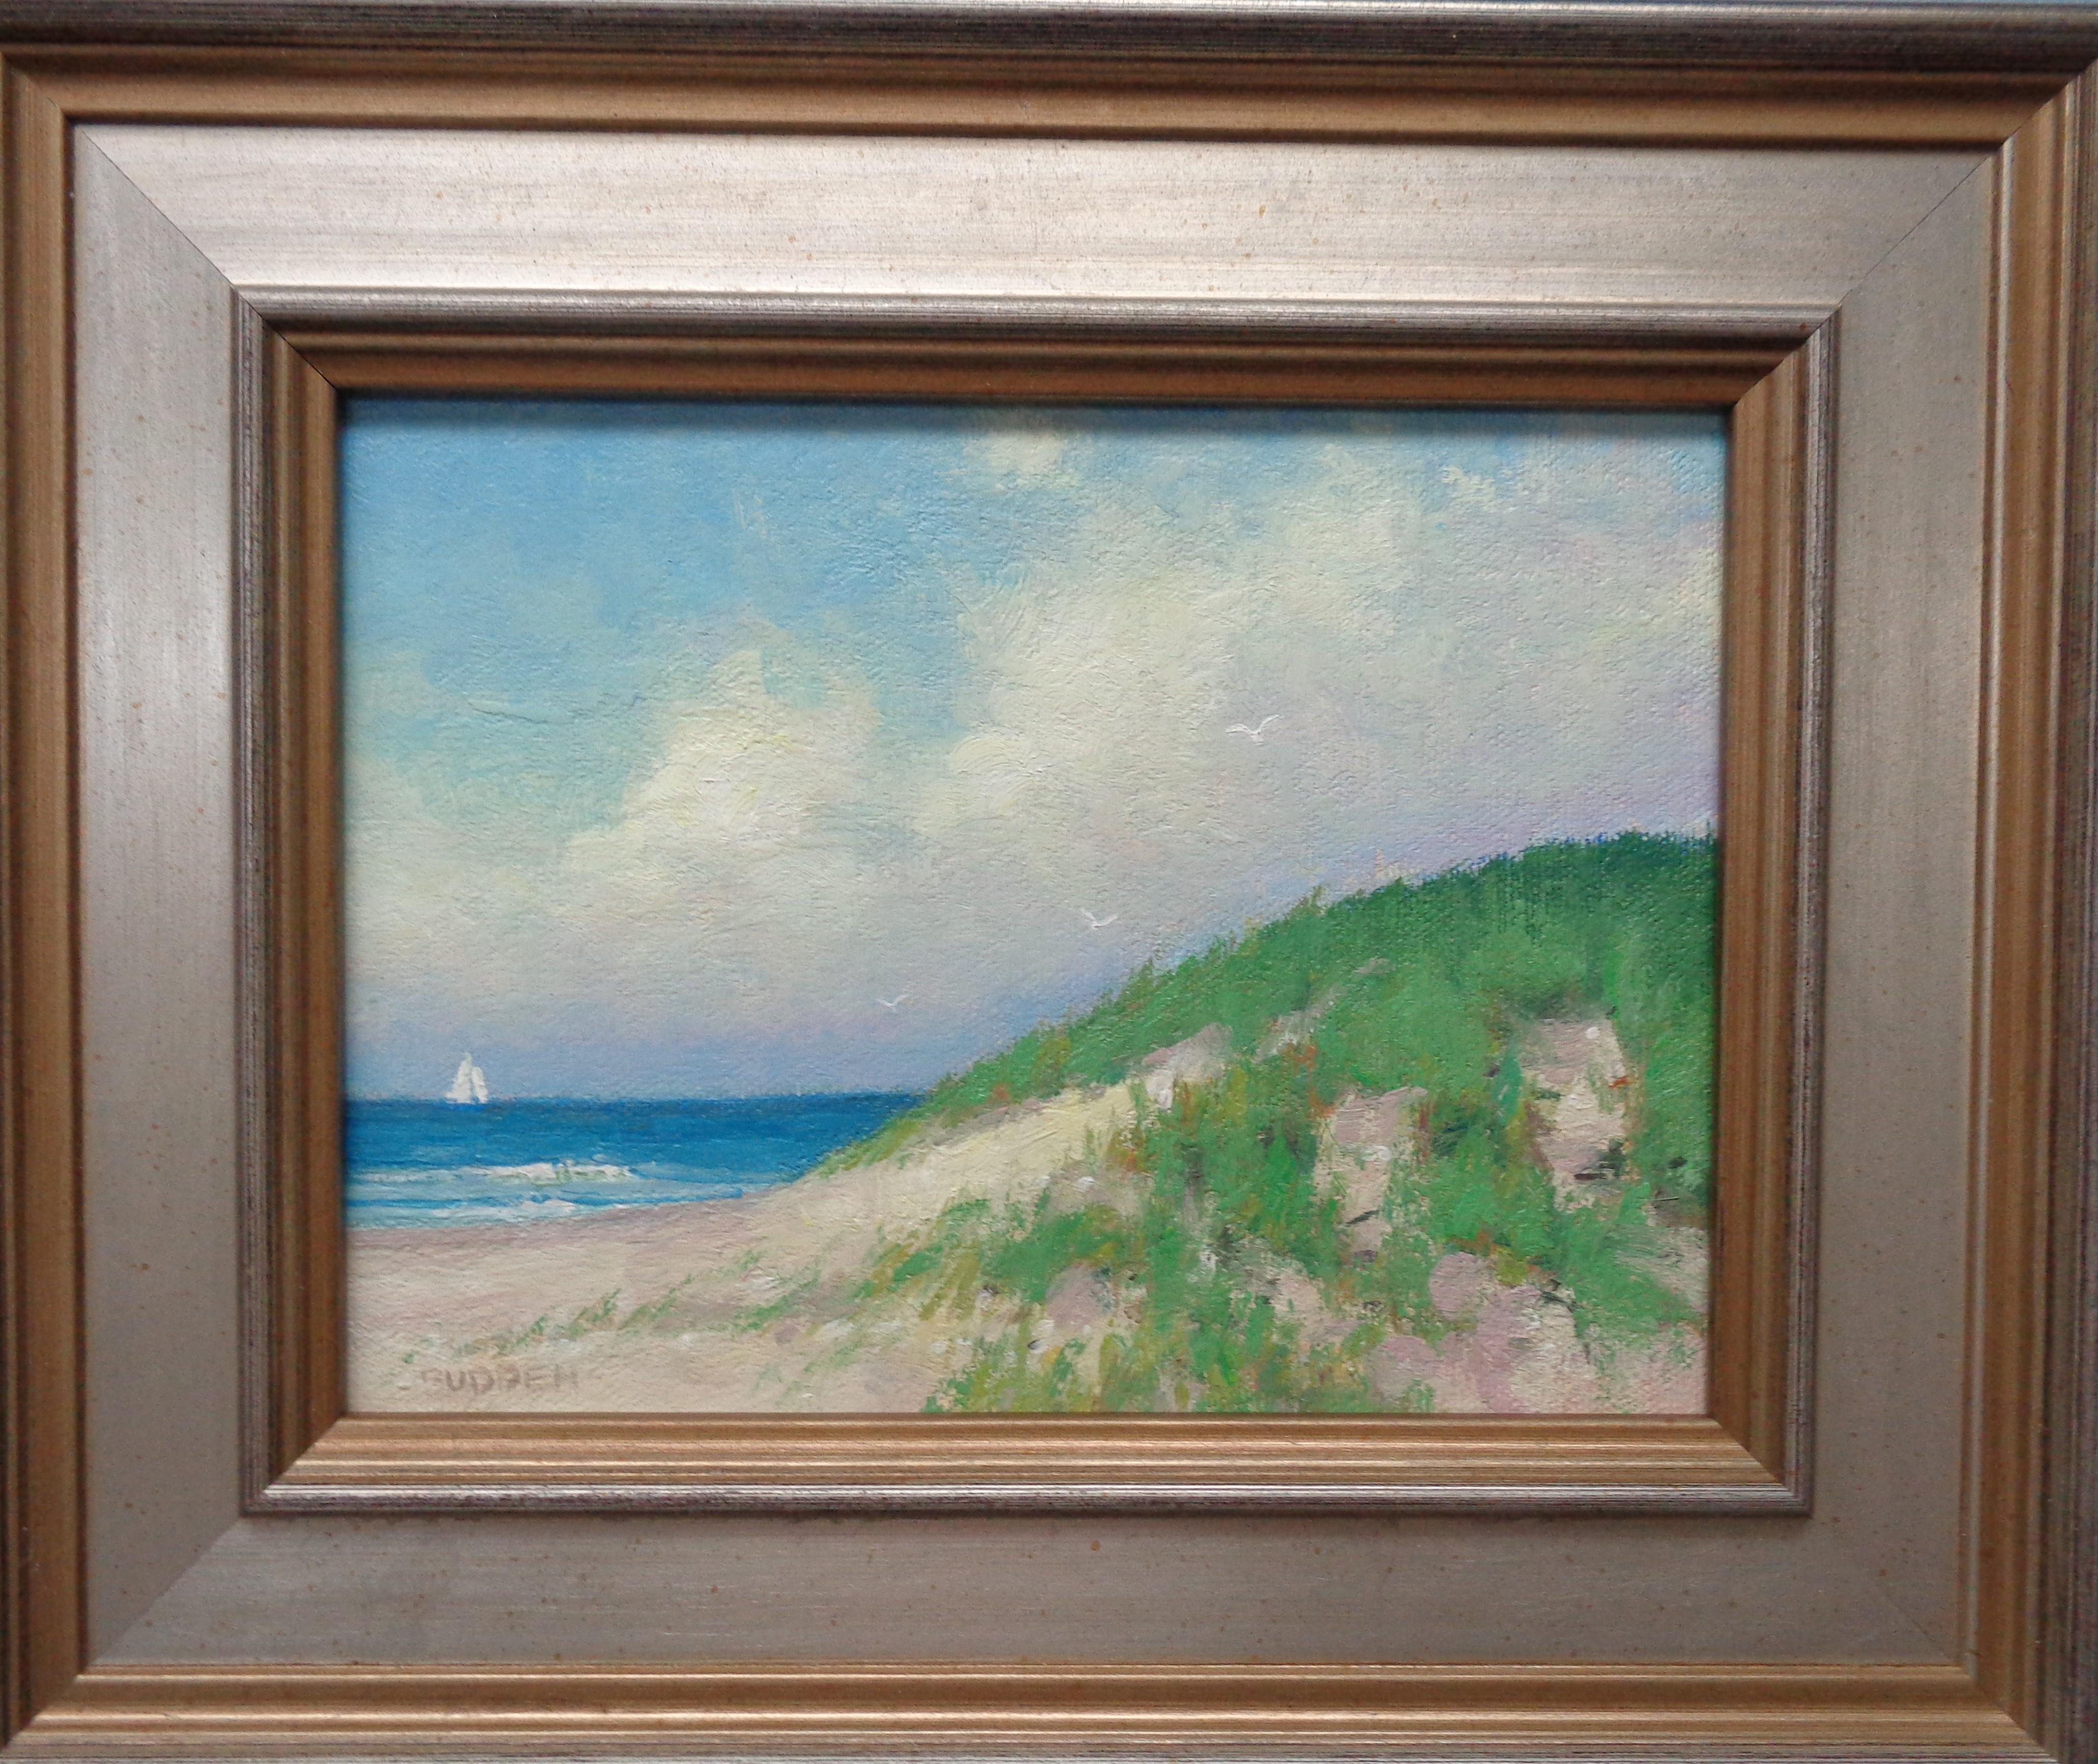 Summer Sky
oil/panel
6 x 8 unframed, 9.5 x 11.5 framed
Summer Sky is an oil painting on canvas by award winning contemporary artist Michael Budden that showcases a beautiful day at the beach. The sun is out as the morning clouds have burned off as